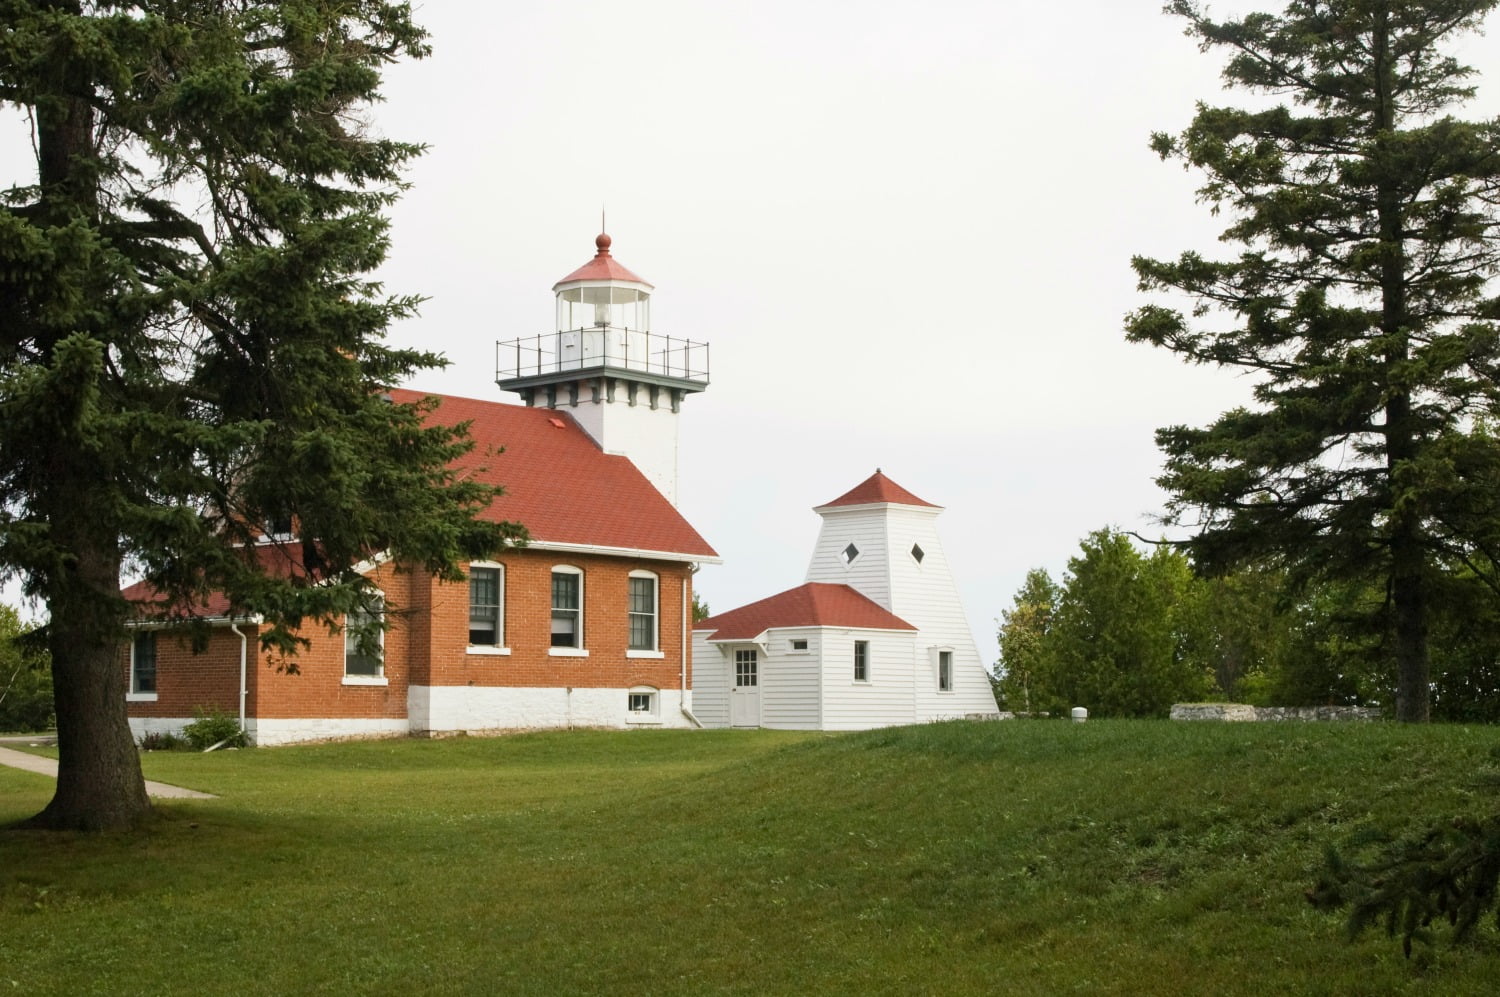 What You Need to Know About the Sherwood Point Lighthouse